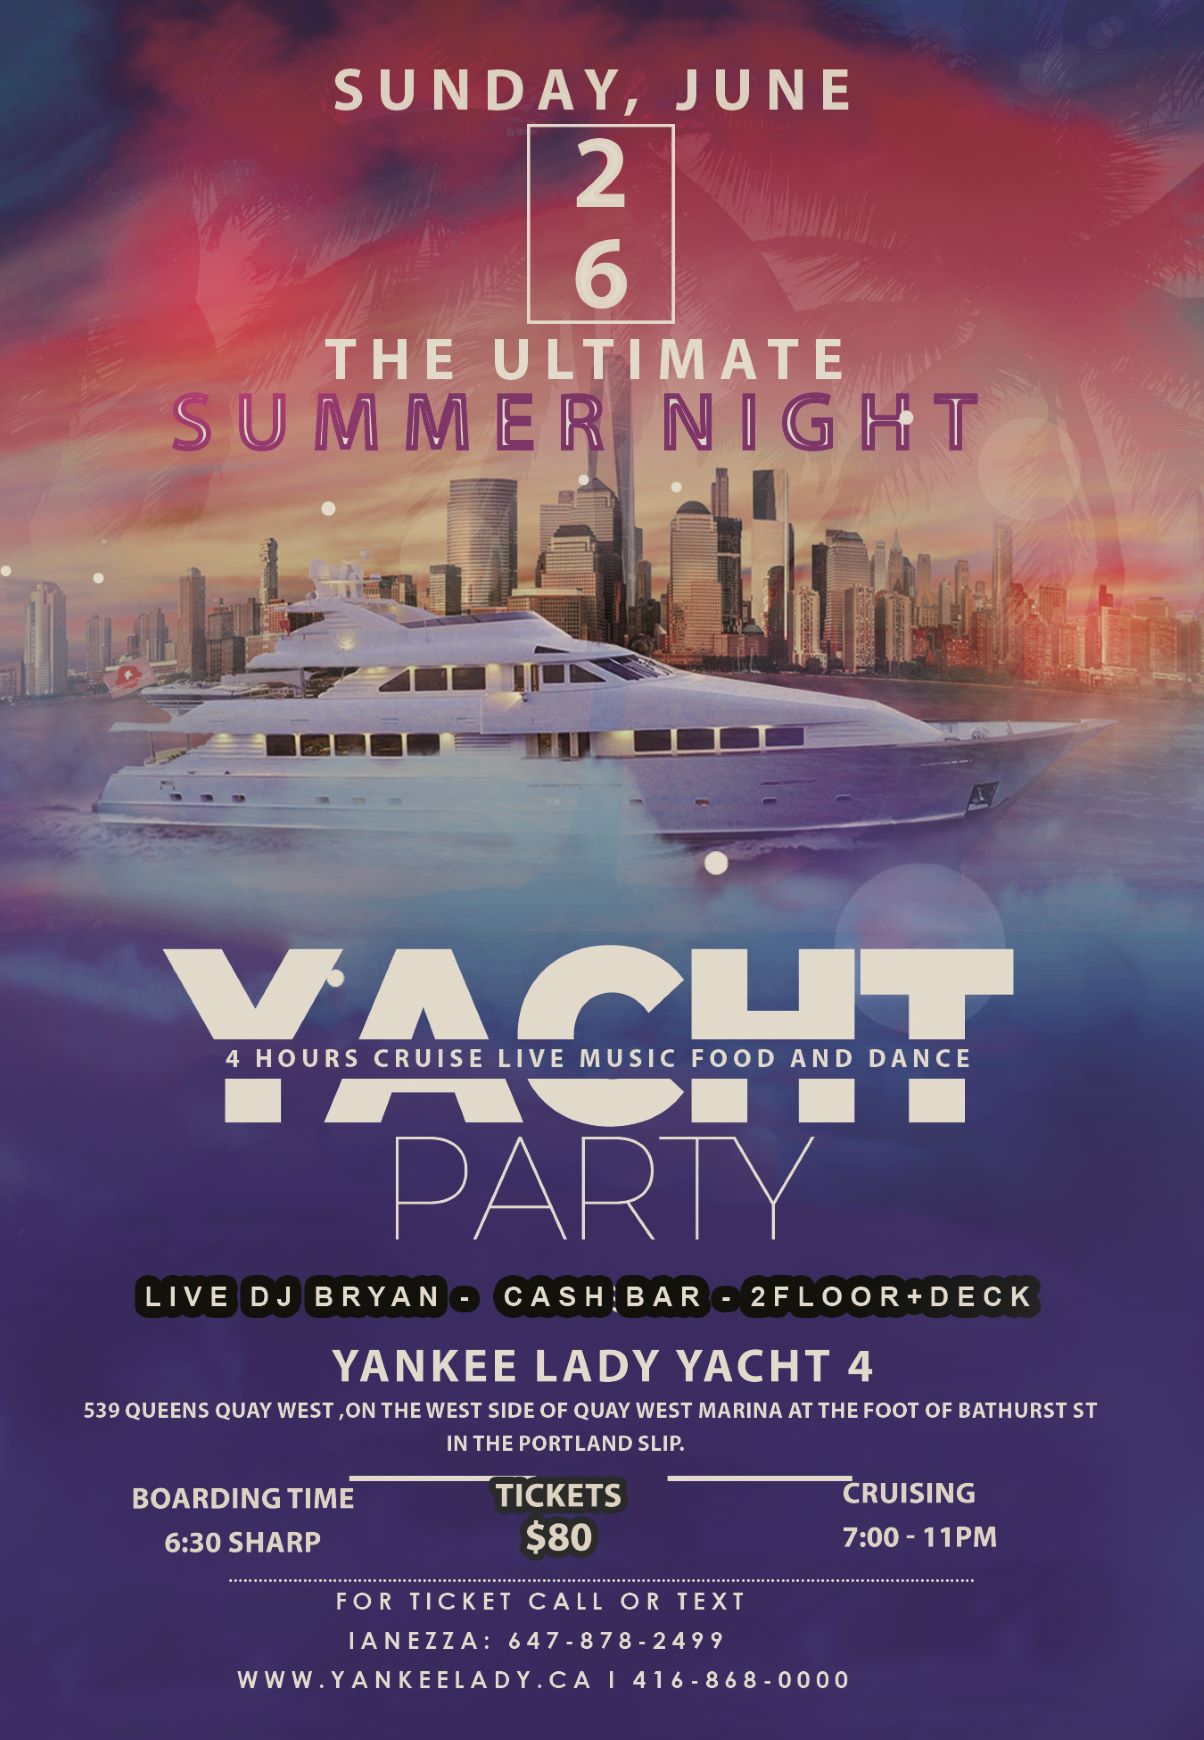 The Ultimate Summer Night Yacht Party